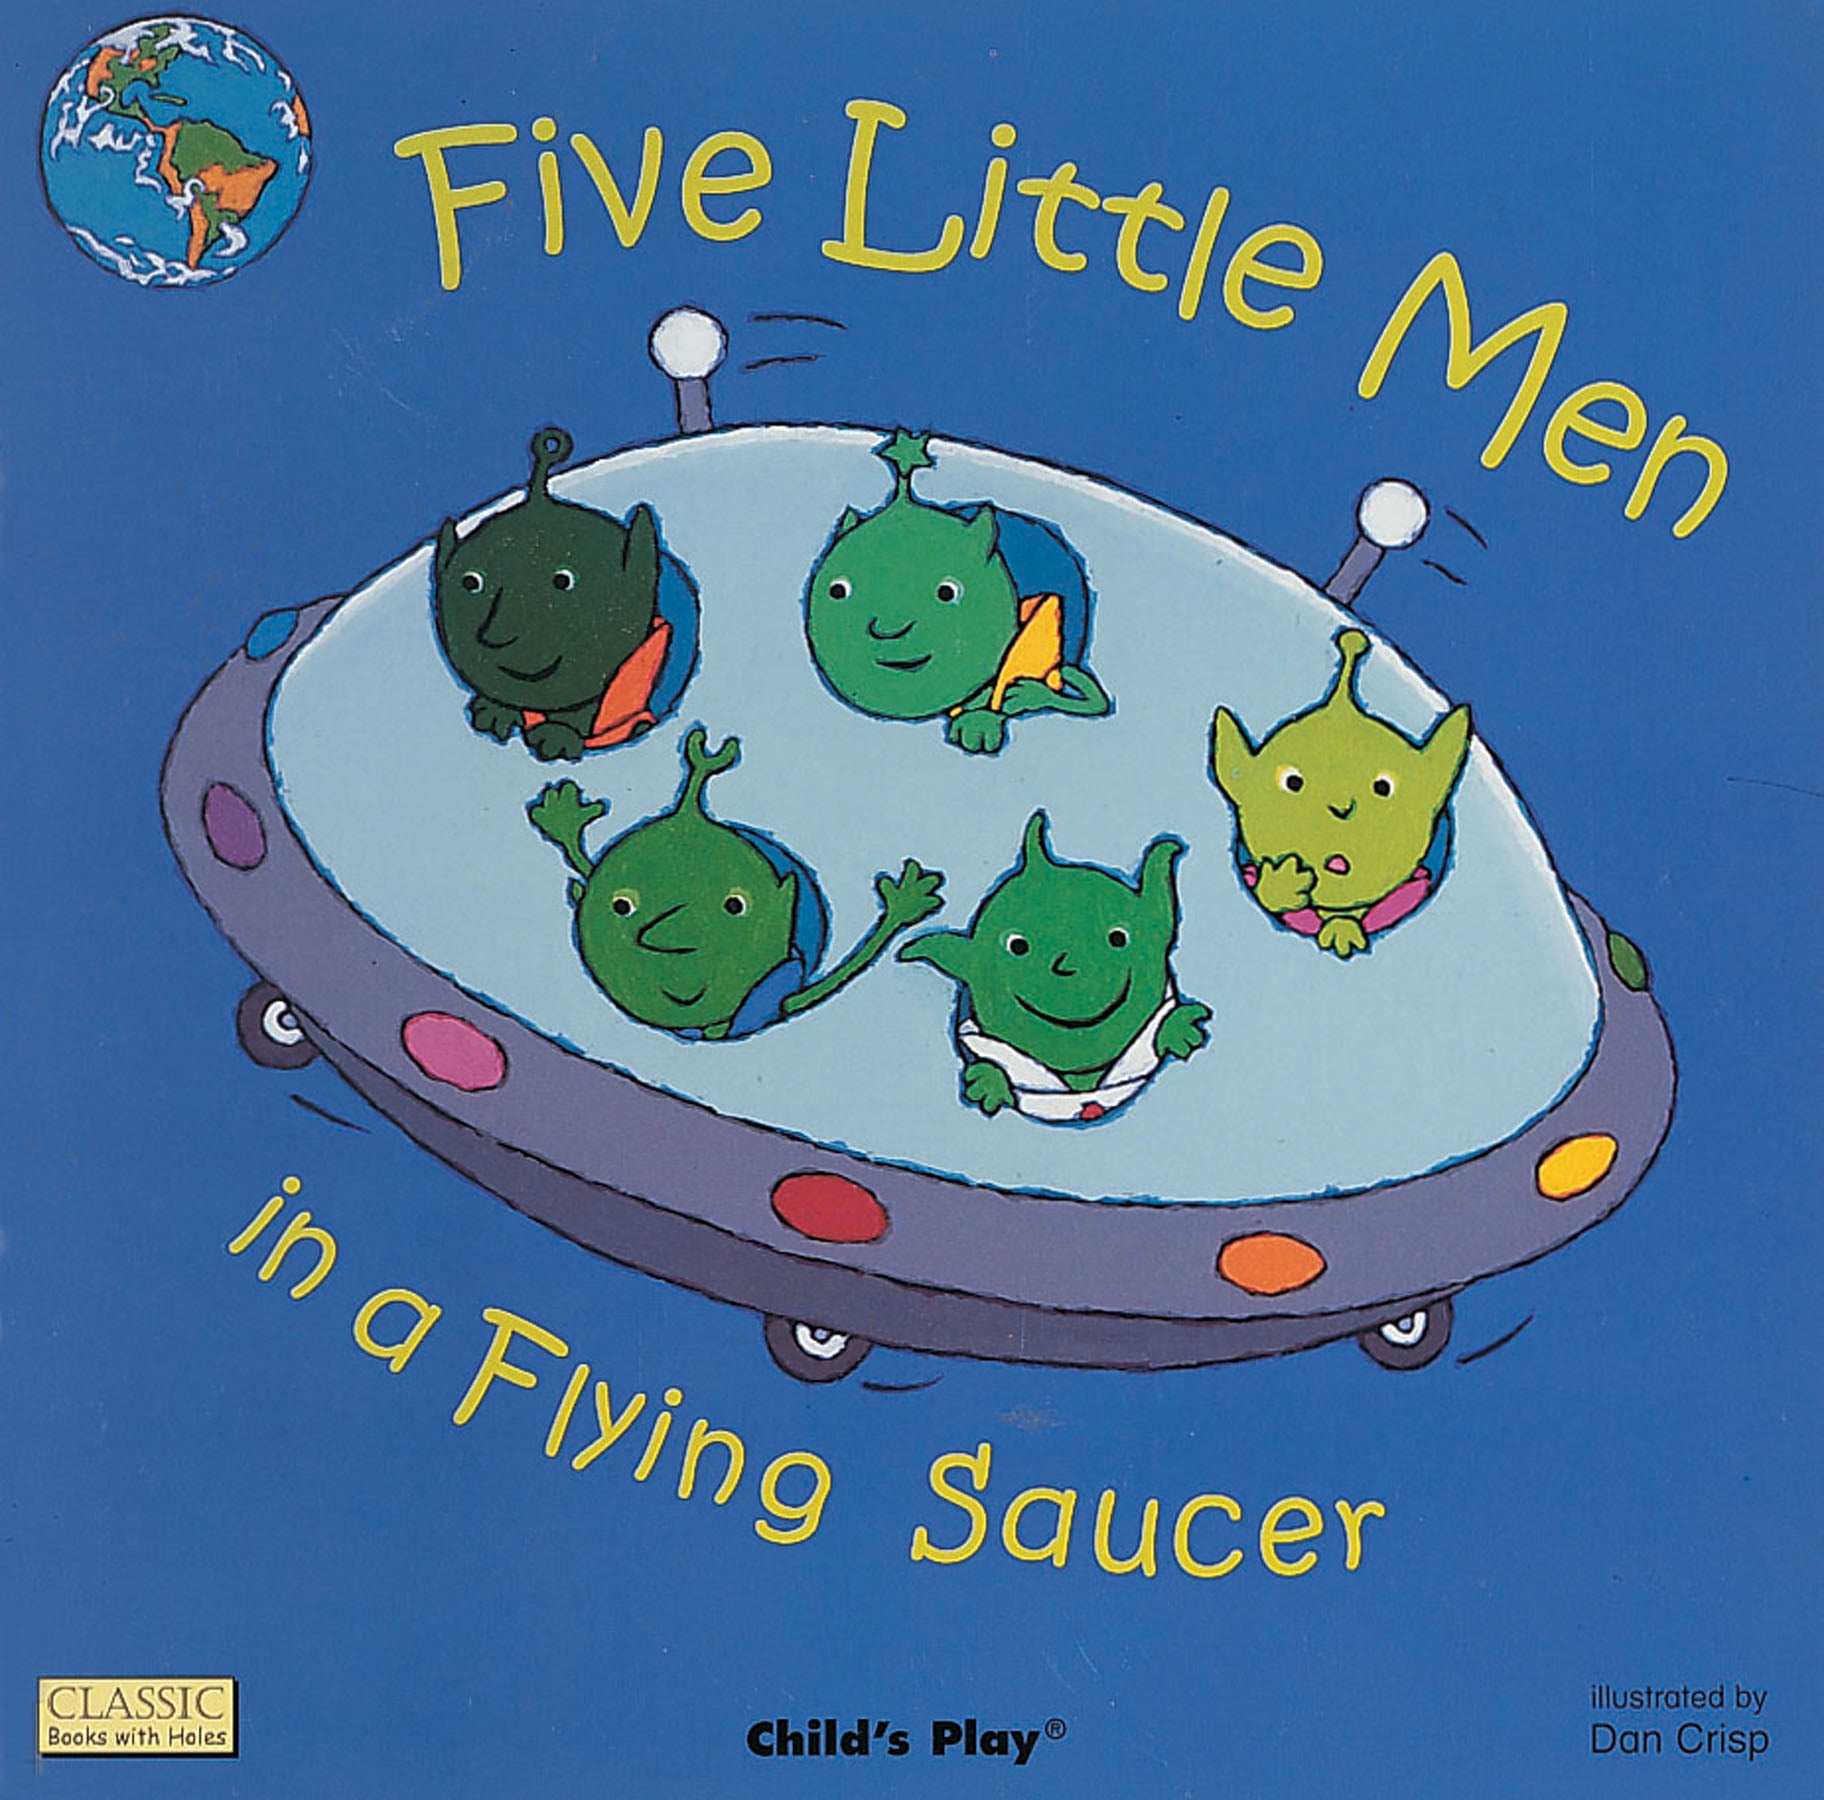 Five Little Men in a Flying Saucer (Big Book Edition)